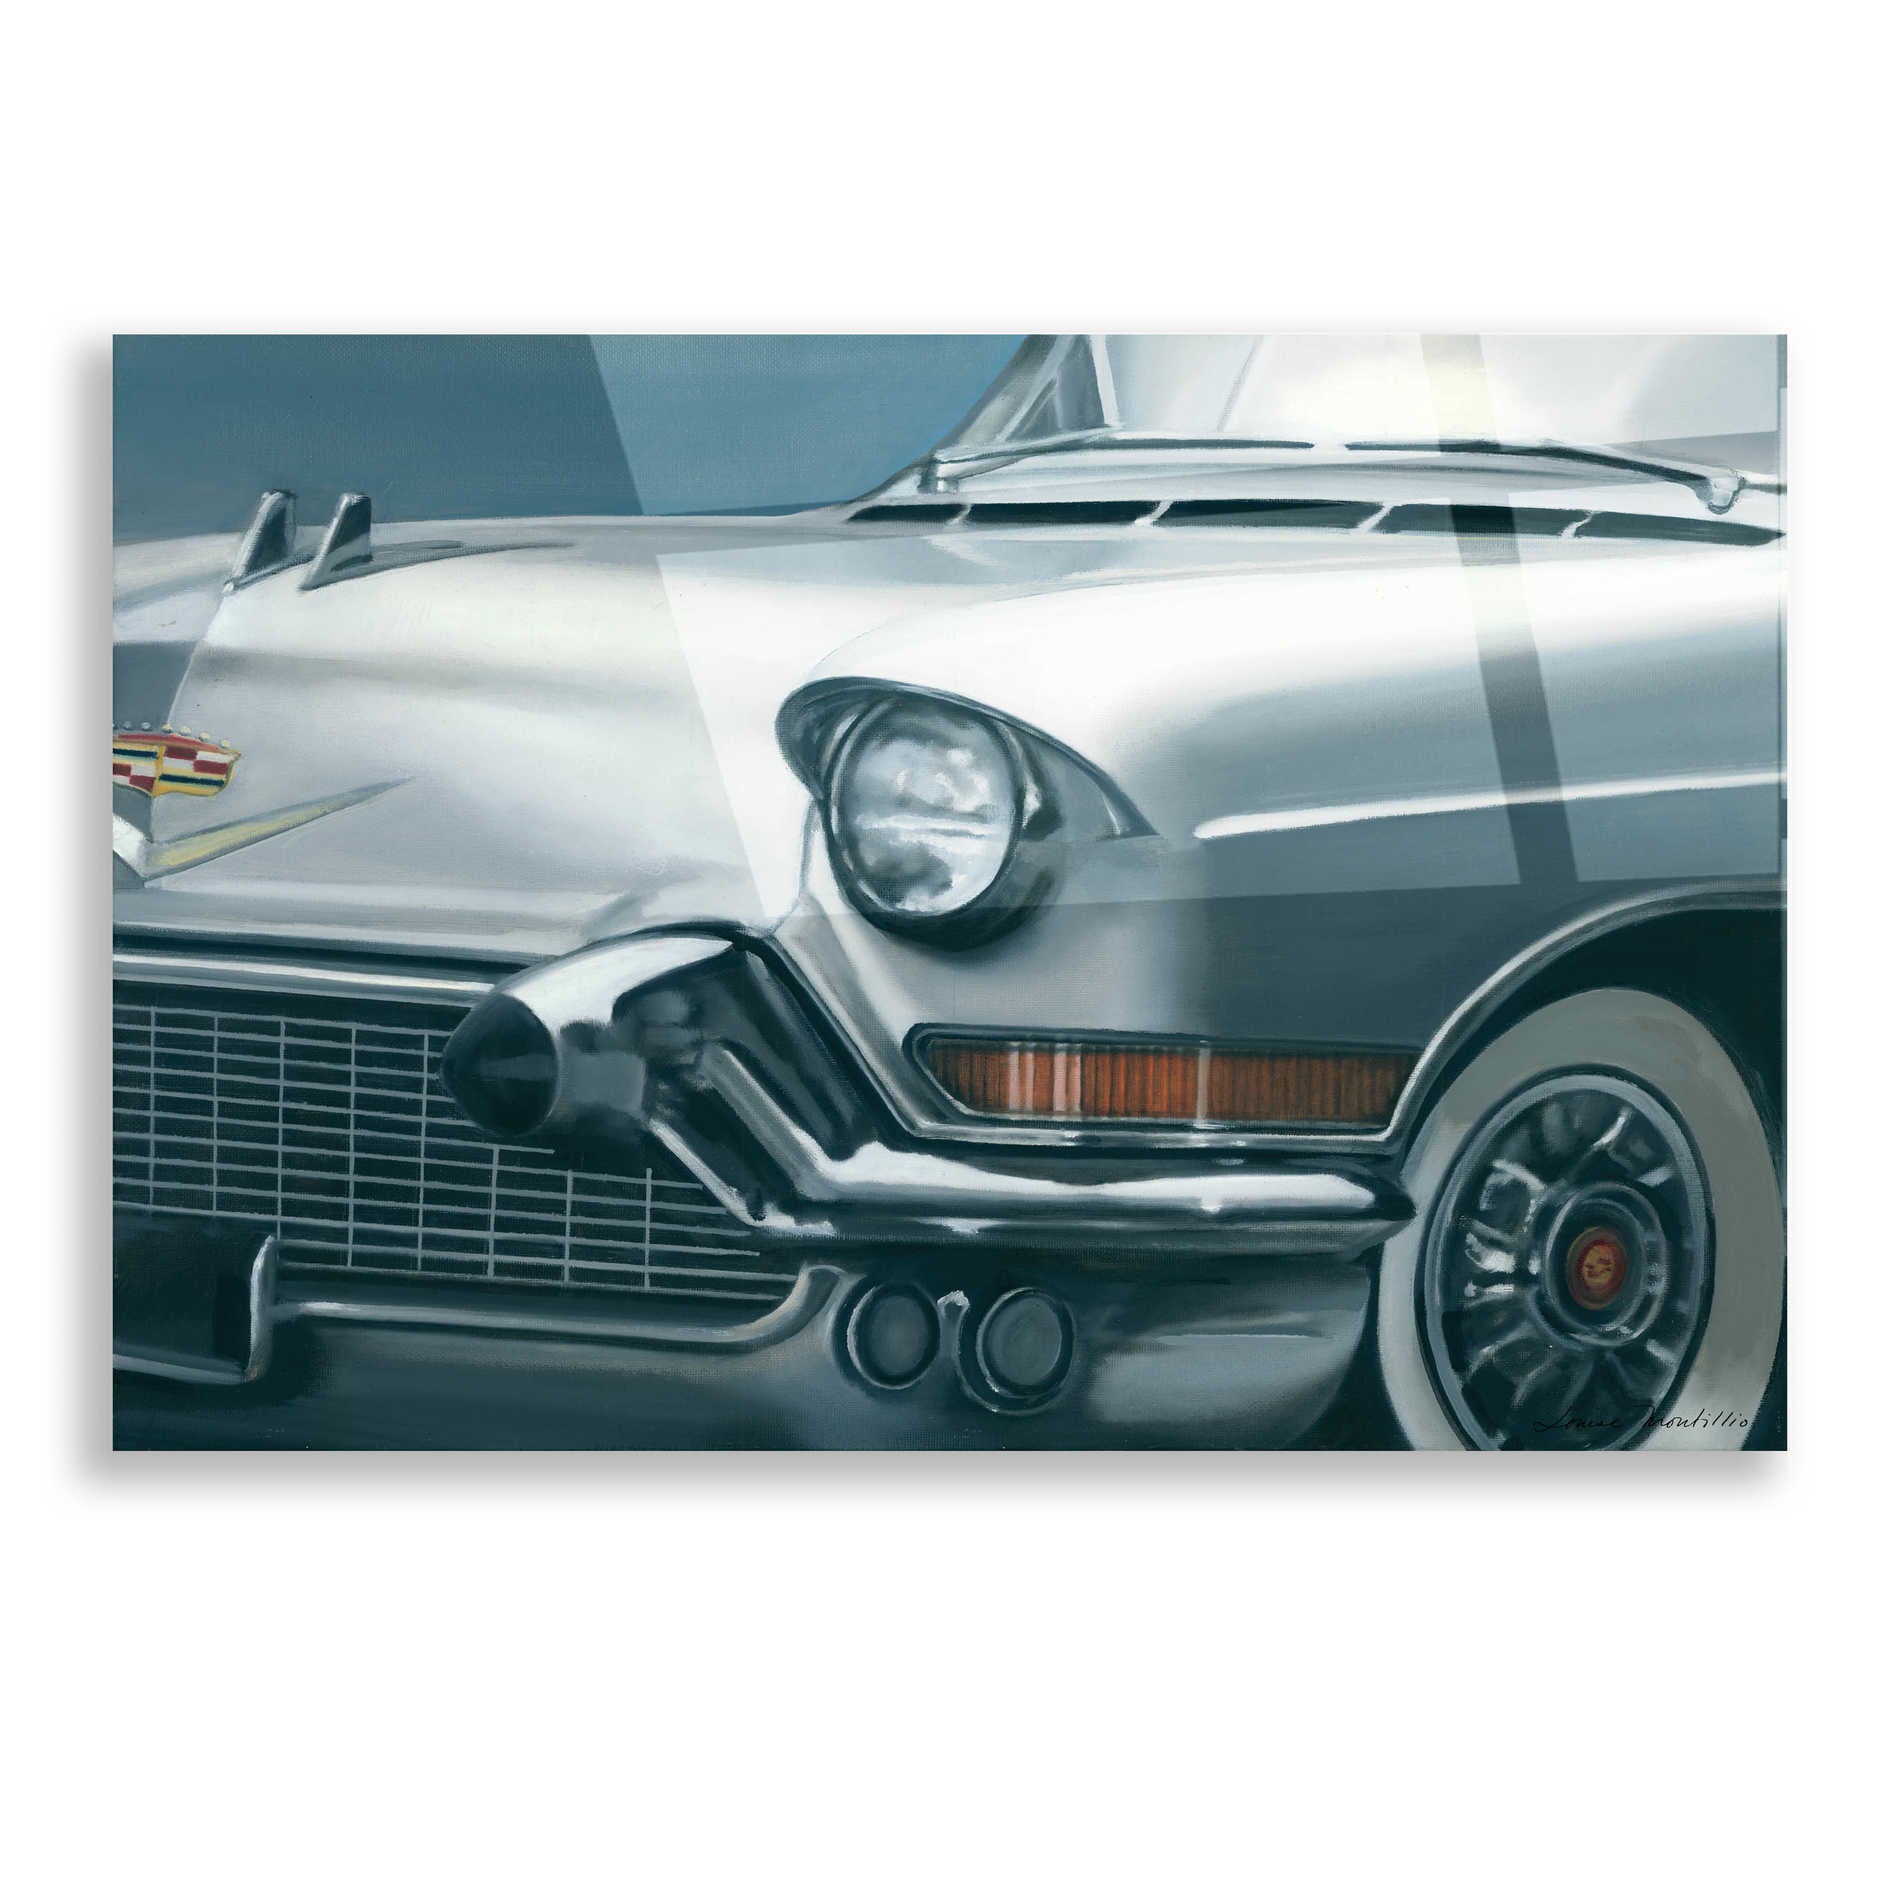 Epic Art 'Vintage Silver Caddy' by Louise Montillio, Acrylic Glass Wall Art,16x12